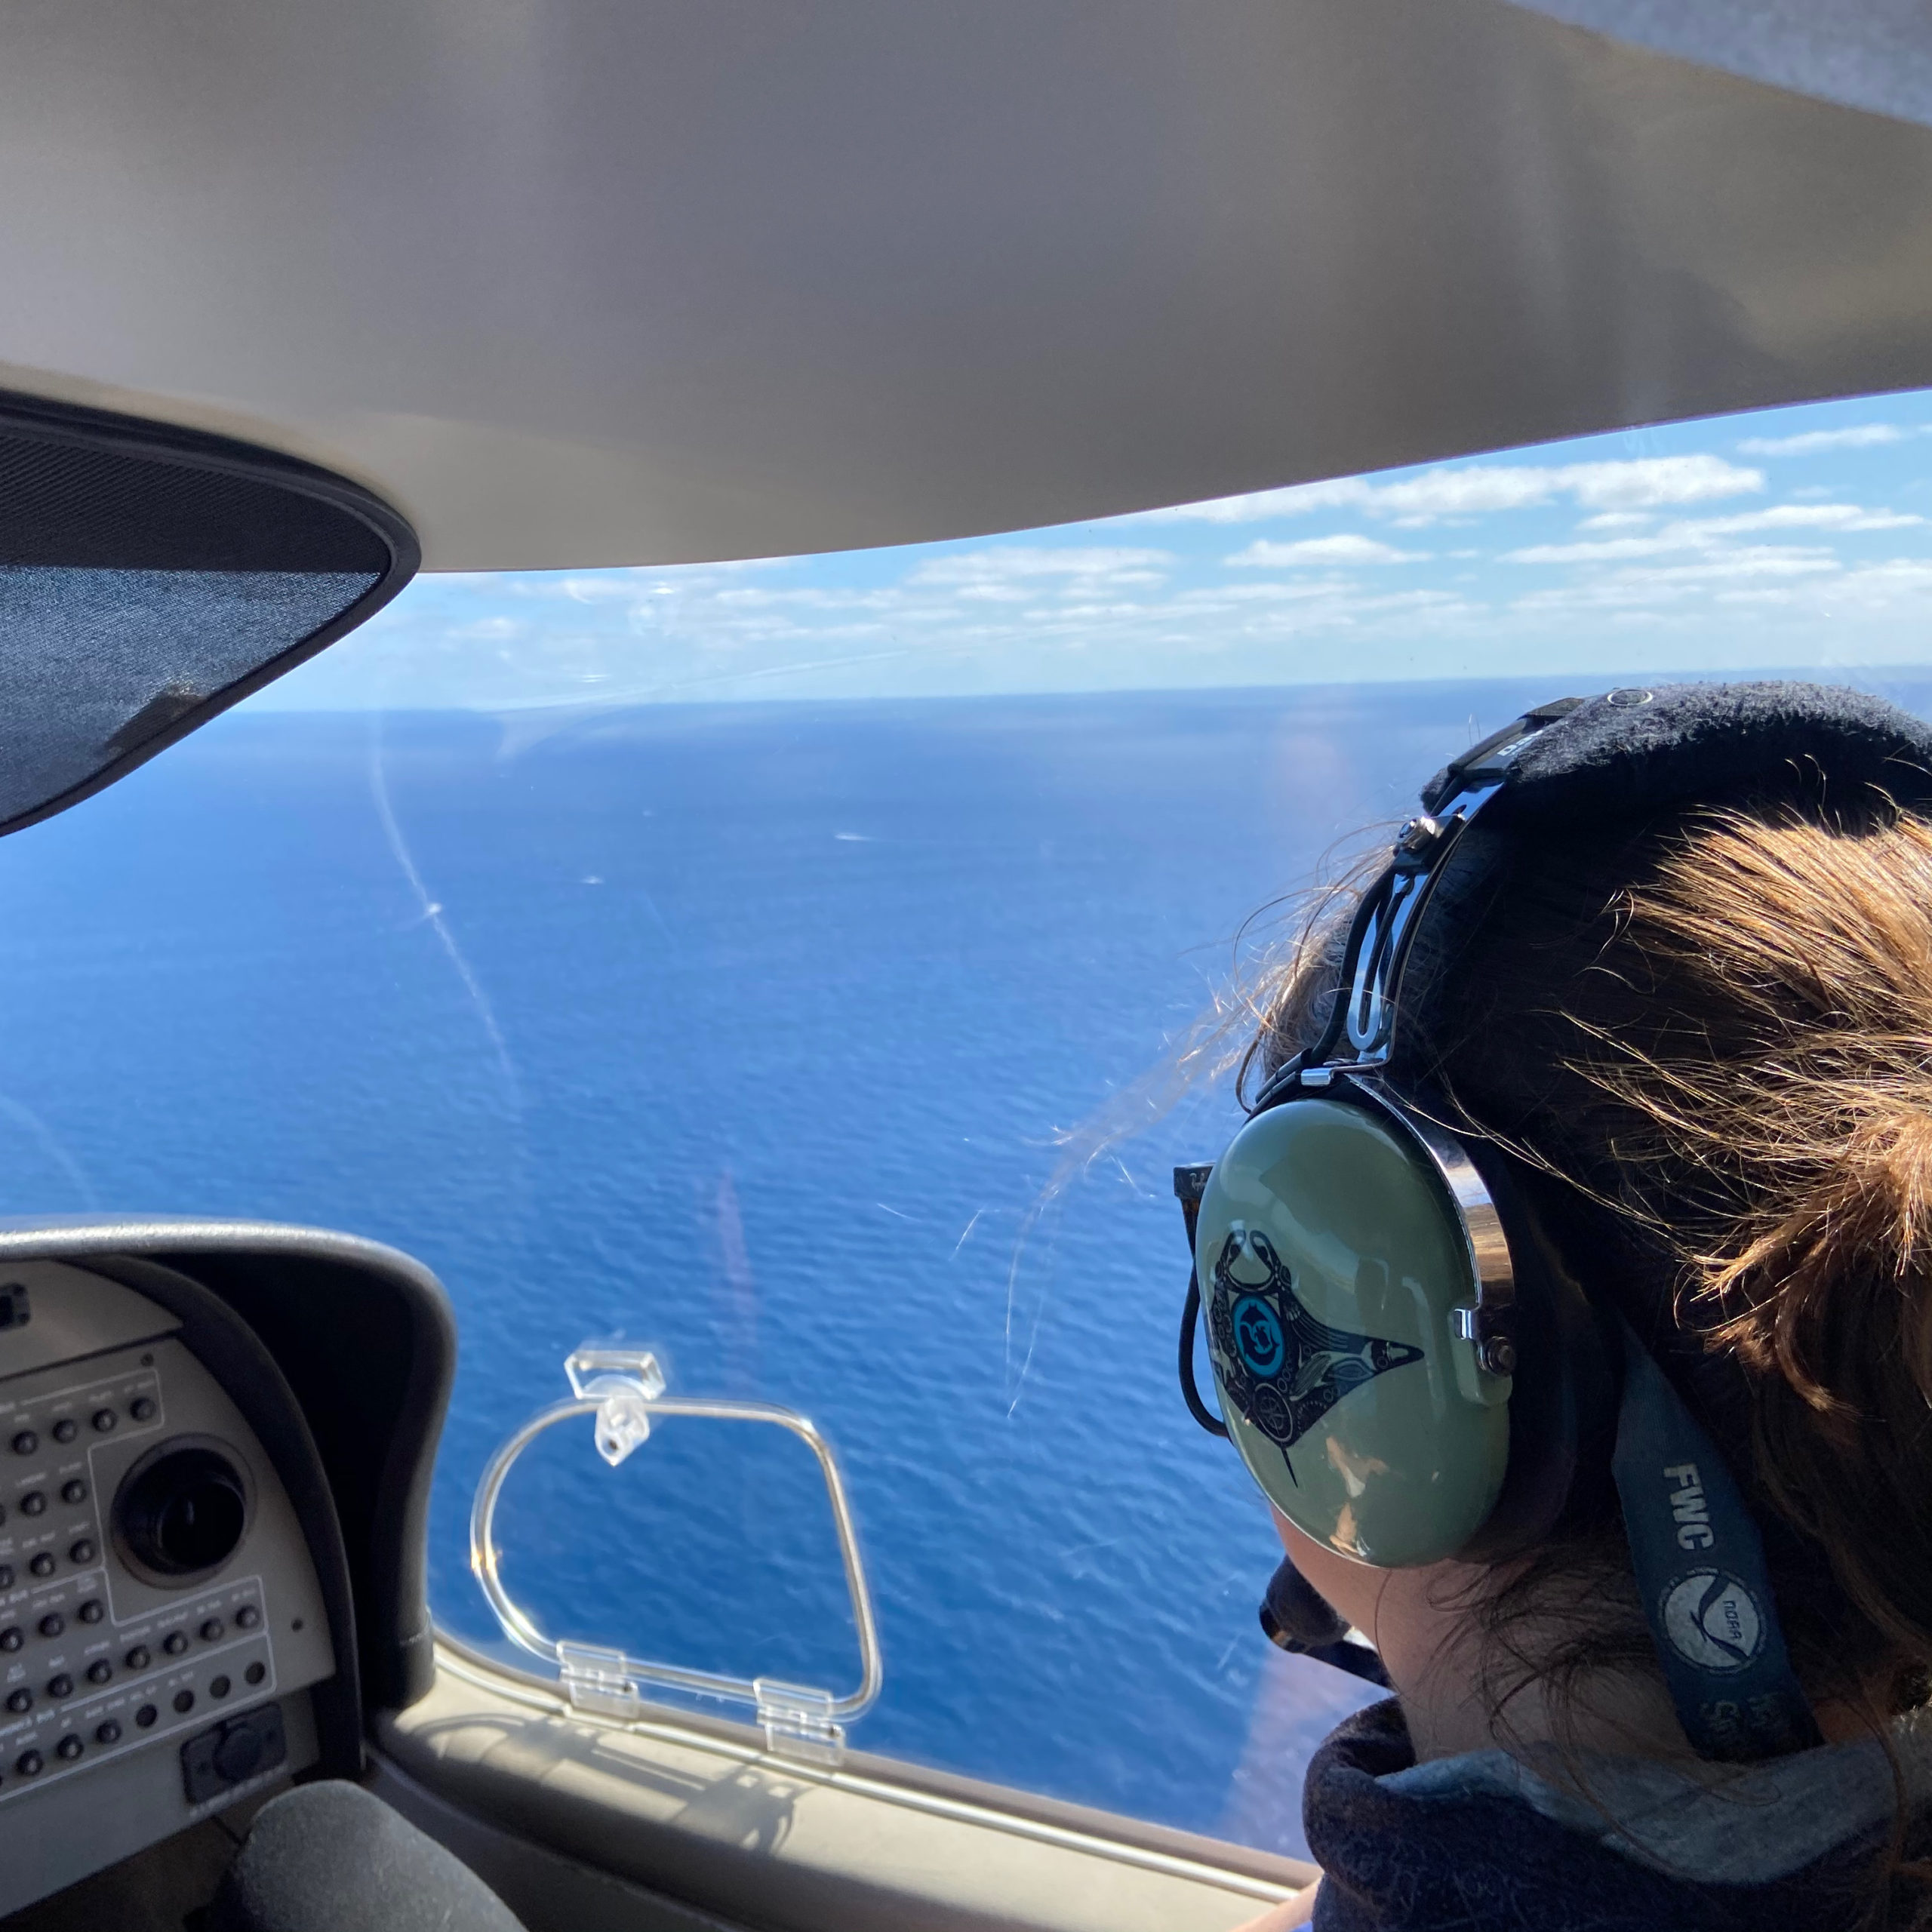 Flying in a small airplane looking for manta rays. I conduct aerial surveys twice a month to look for manta rays along the Florida coastline!